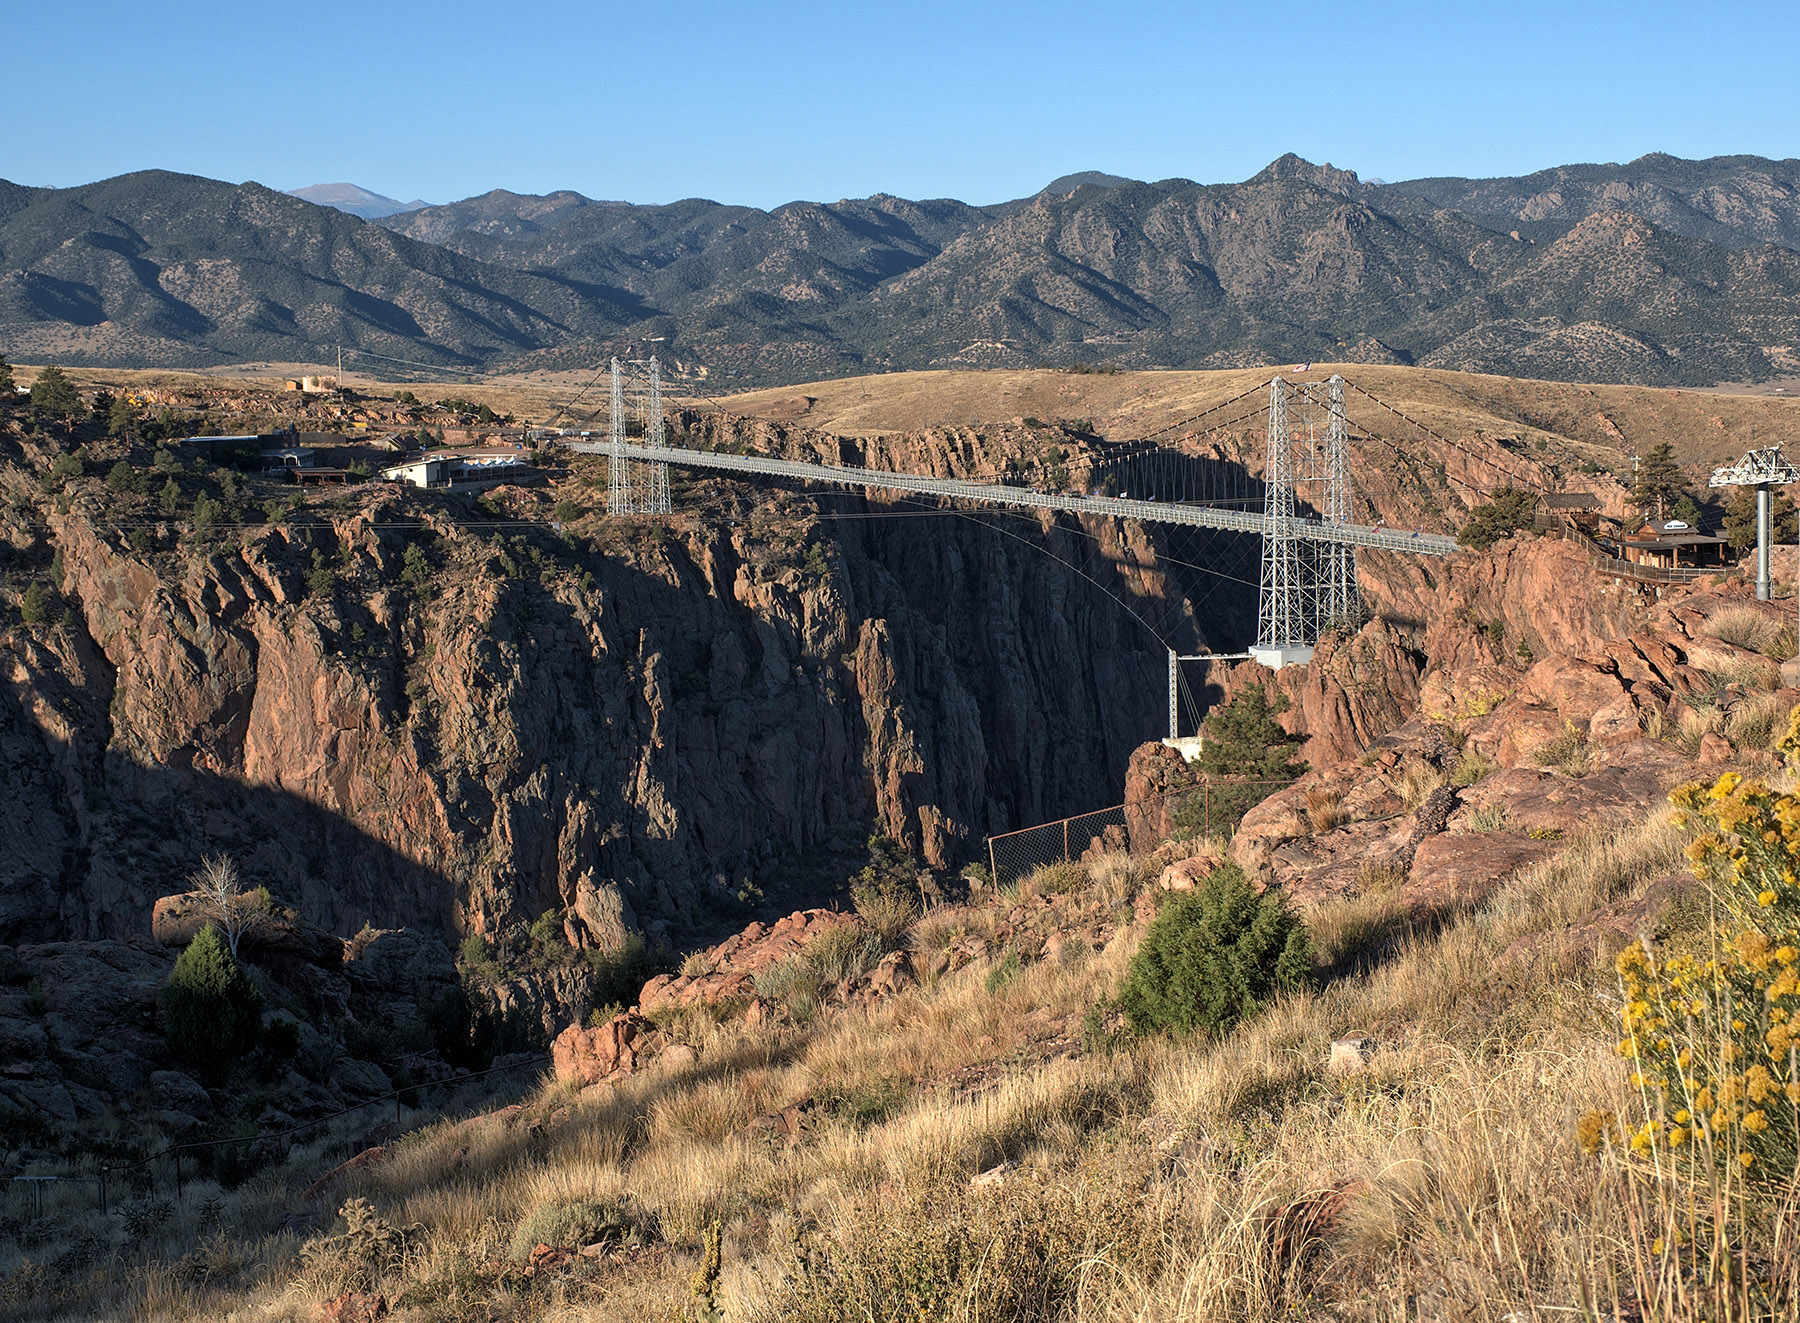 Royal Gorge and bridge near Cañon City.  The geologic history is similar to Black Canyon of the Gunnison.